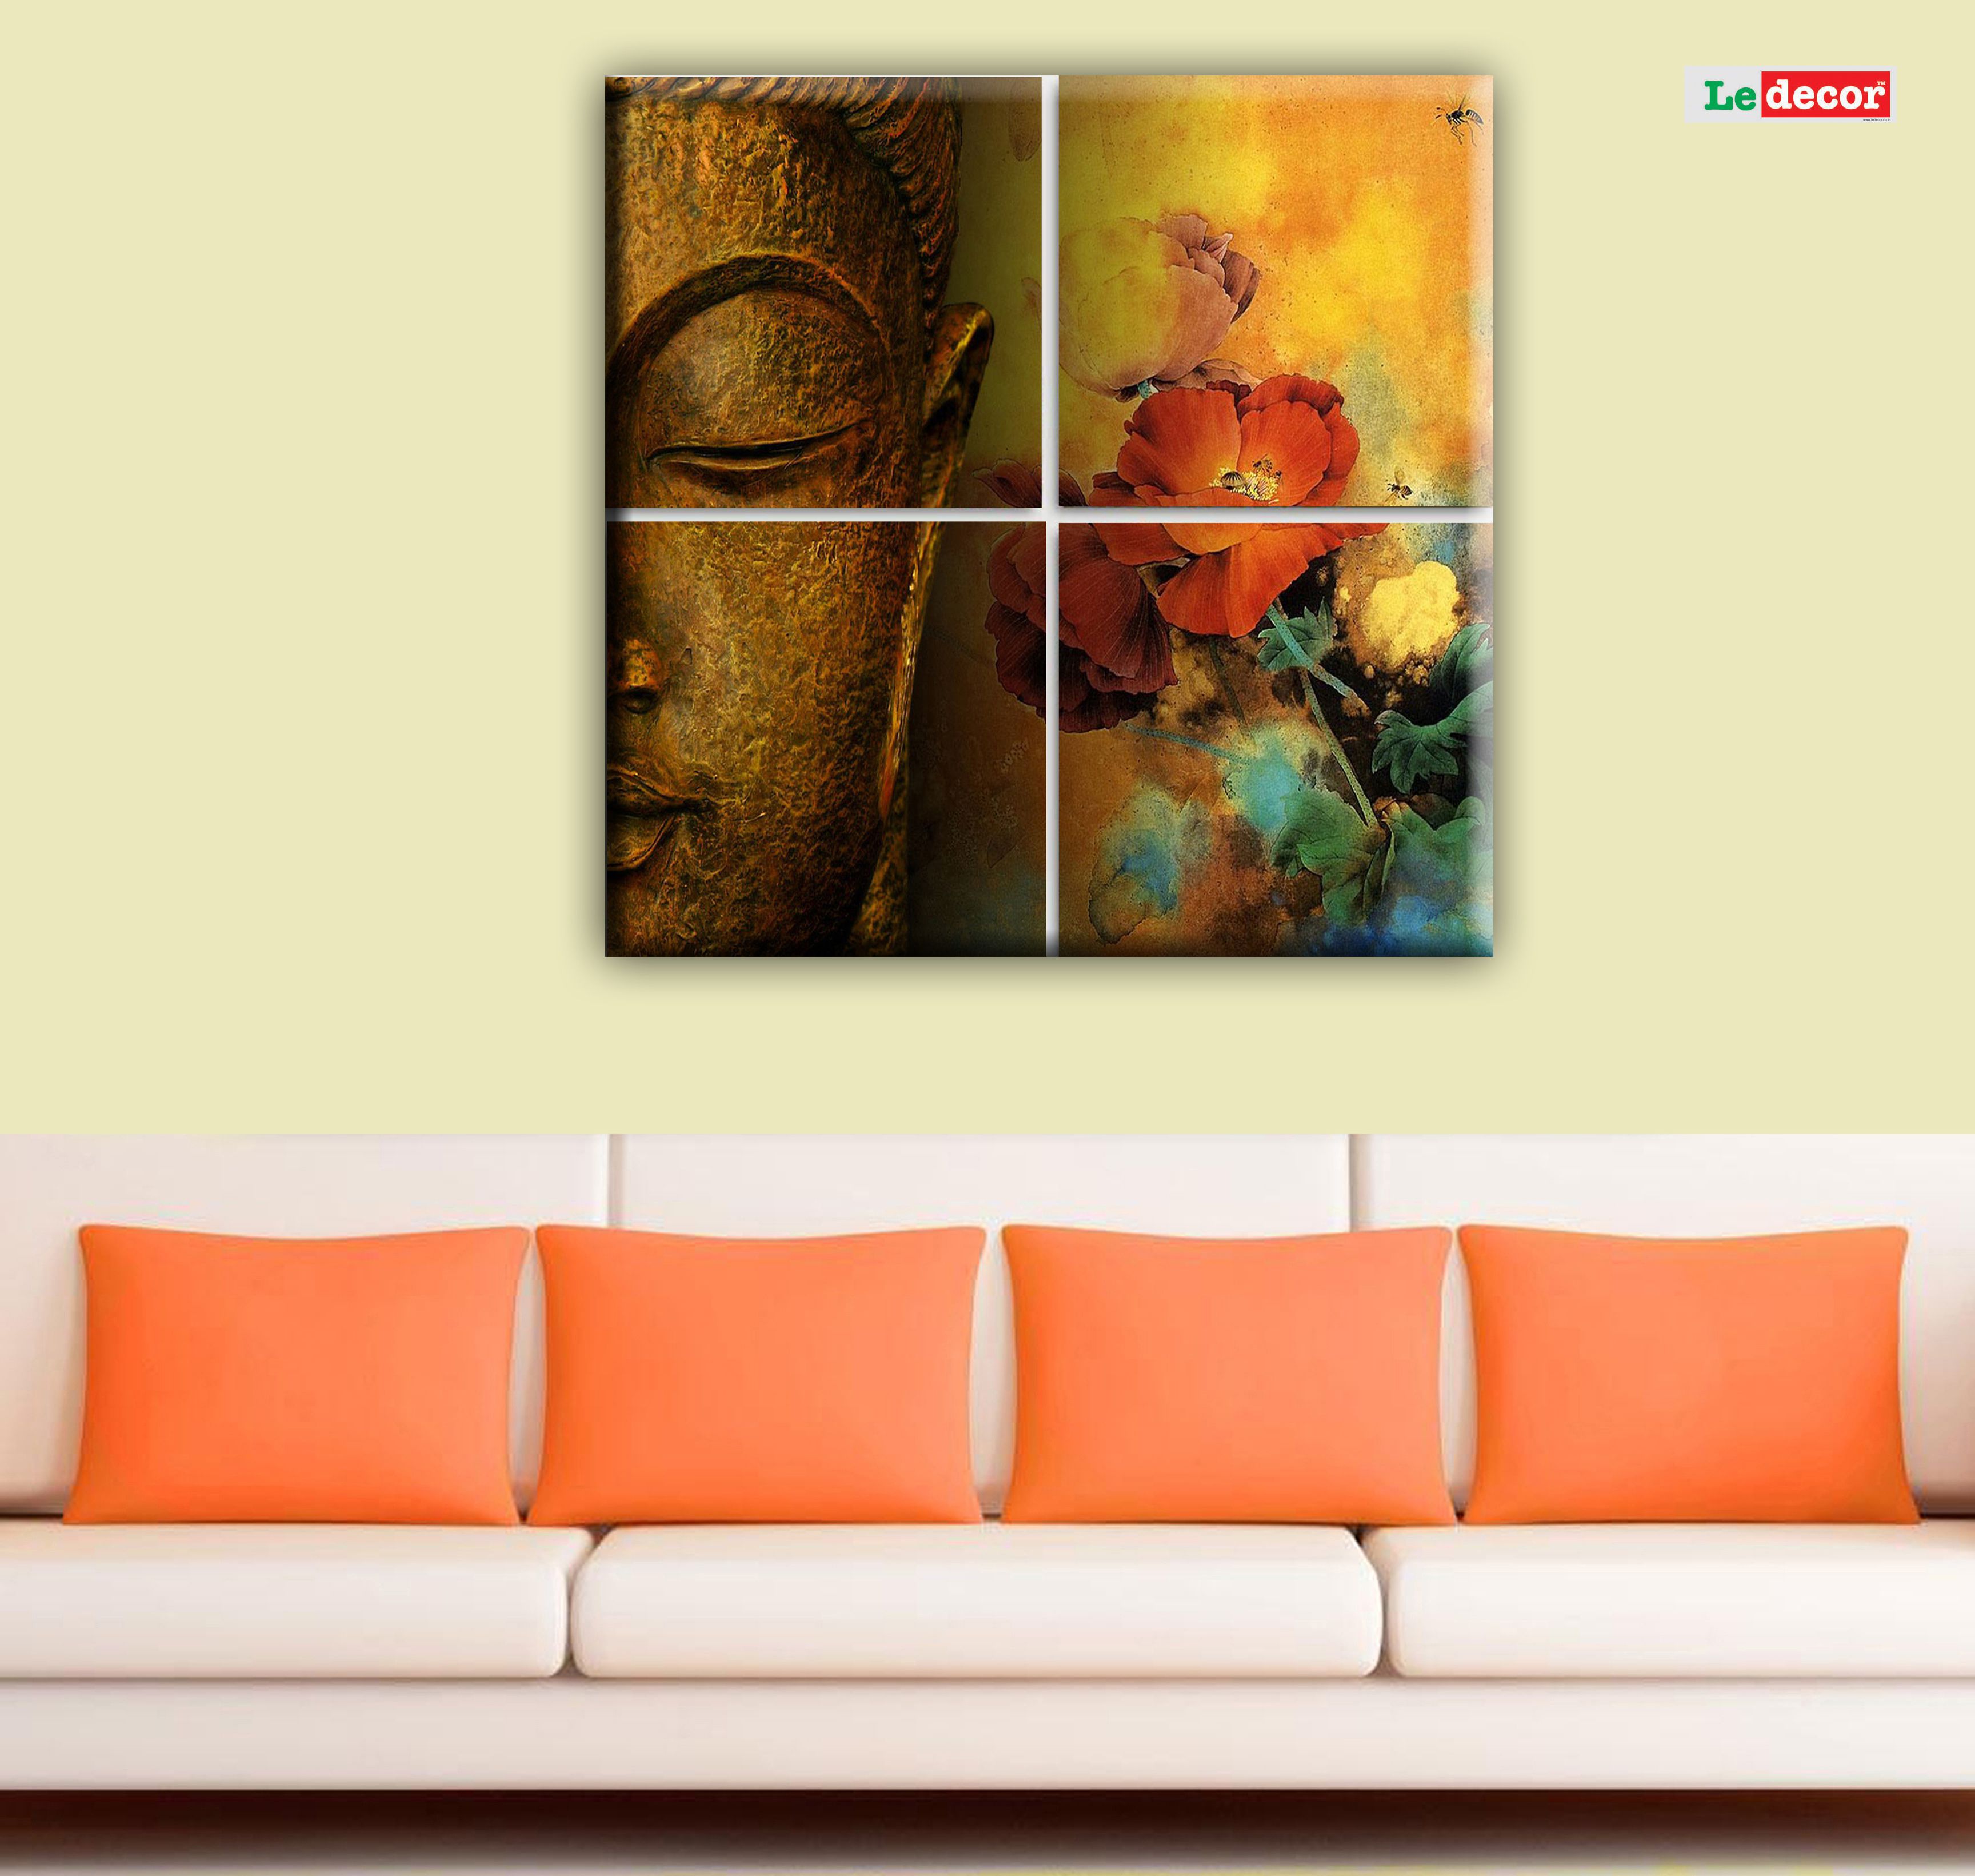 Ledecor Canvas Wall Decor Buddha Painting Set Of 4 Canvas Painting With Frame Buy Ledecor Canvas Wall Decor Buddha Painting Set Of 4 Canvas Painting With Frame At Best Price In India